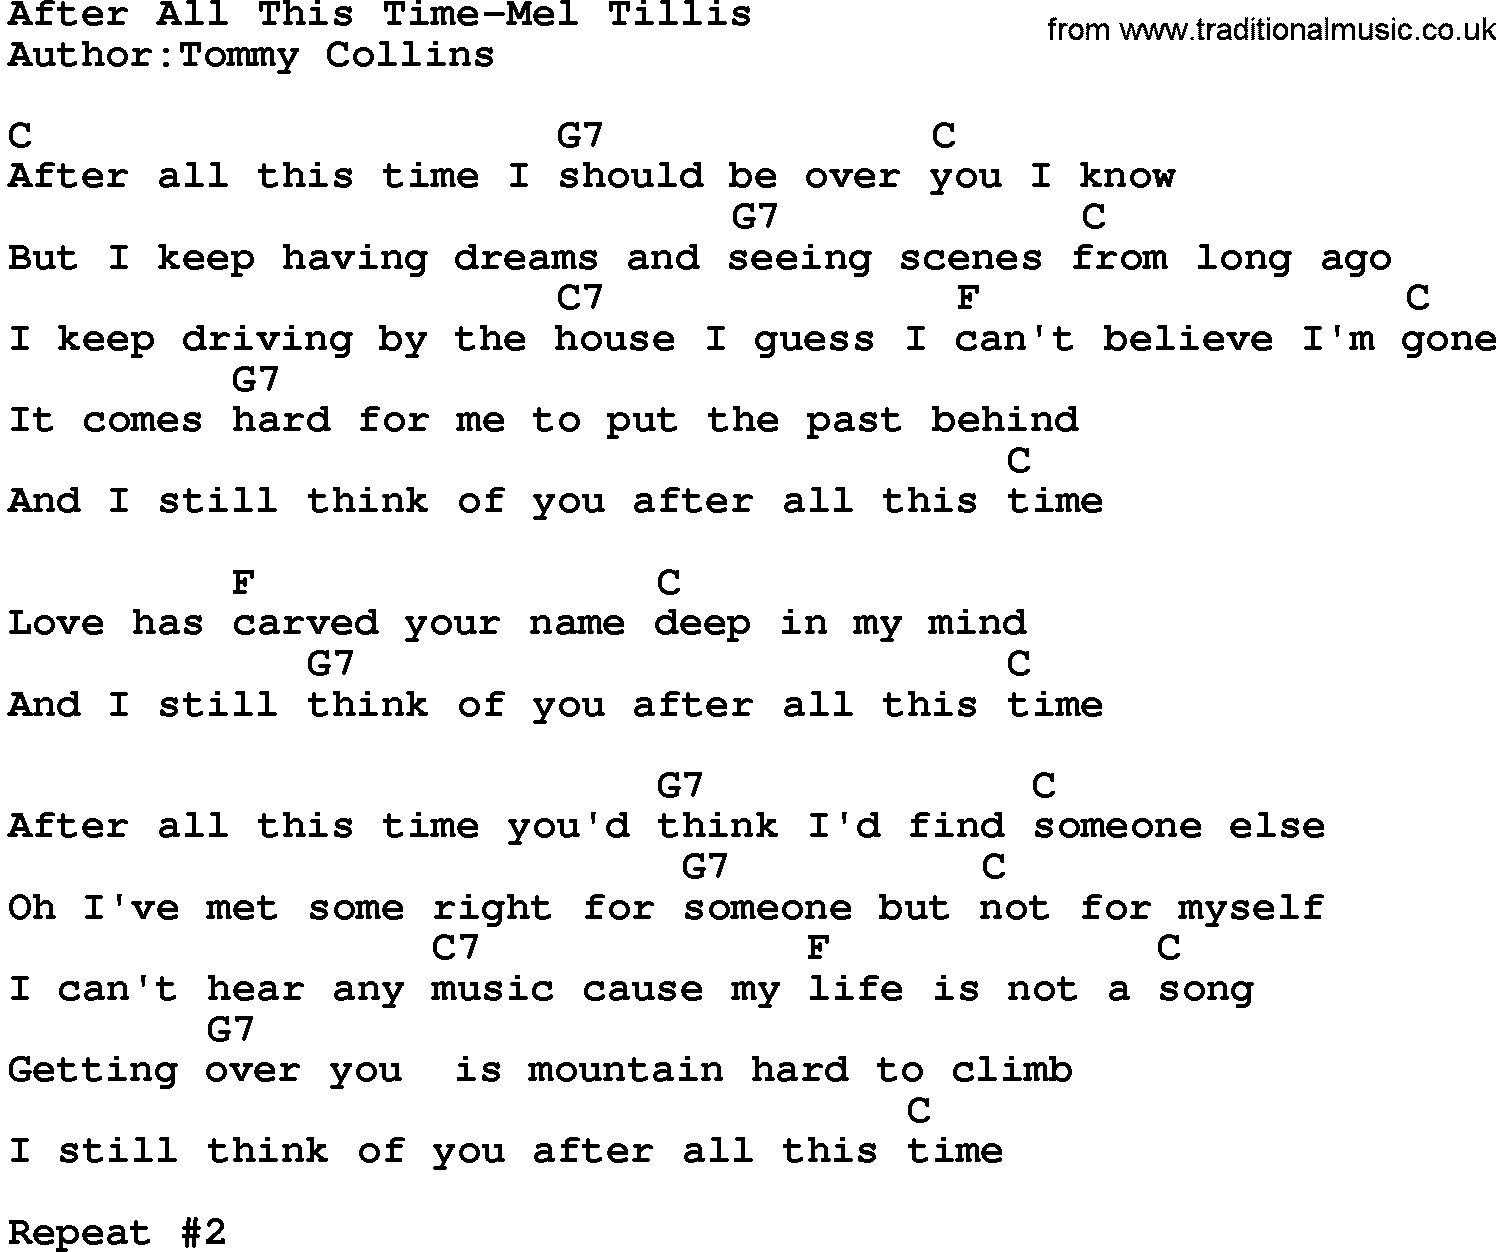 Country music song: After All This Time-Mel Tillis lyrics and chords